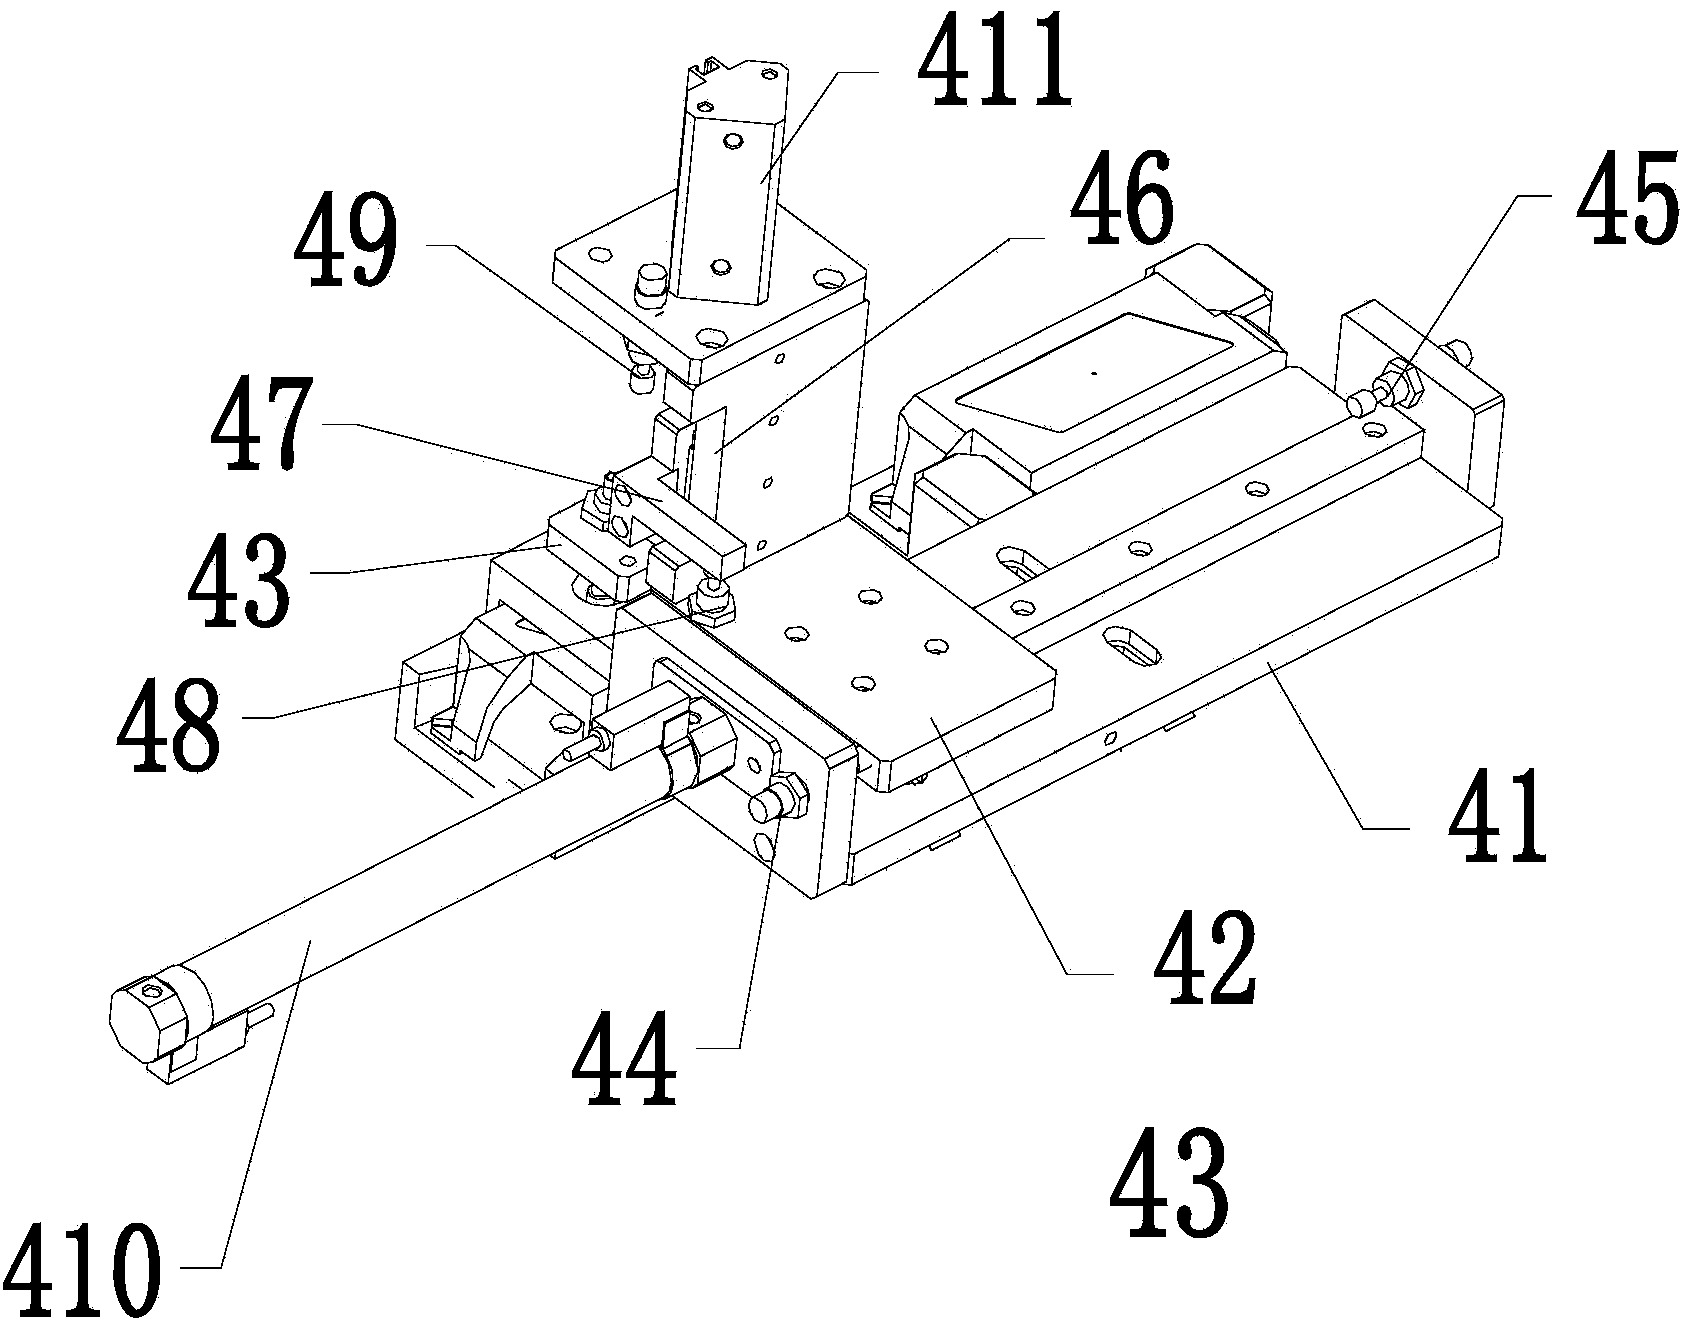 Laser marking device capable of feeding and discharging materials automatically